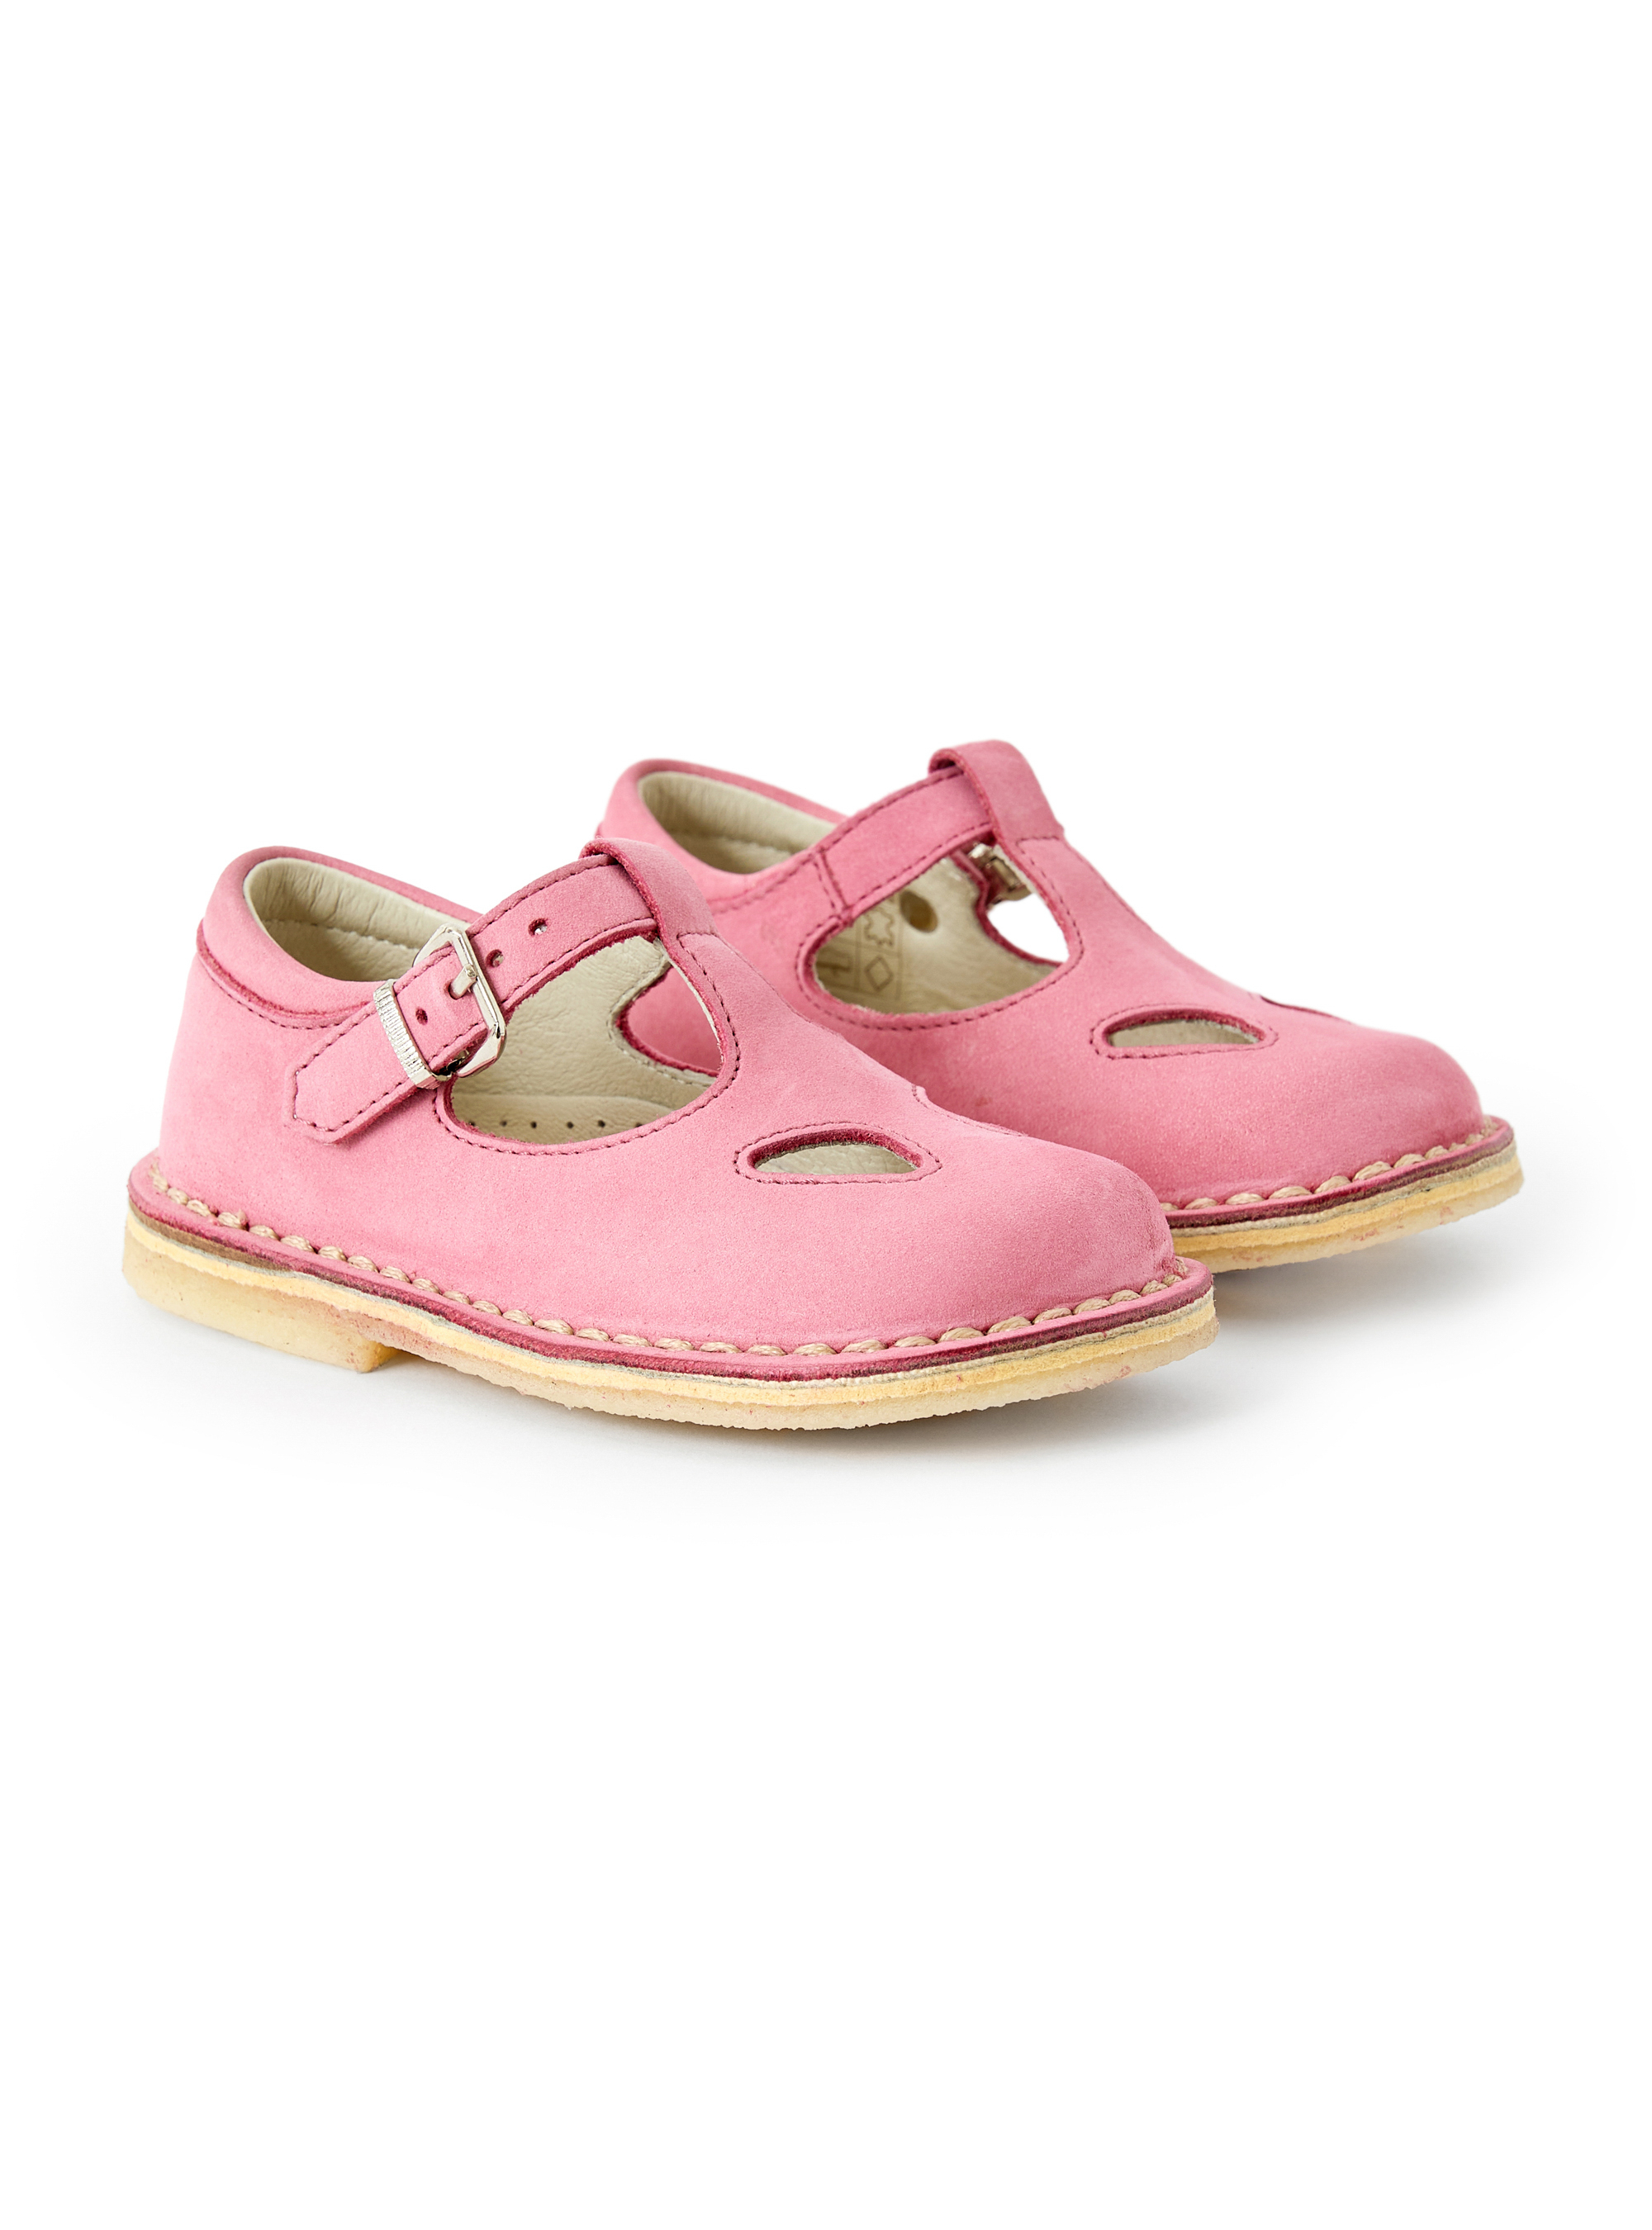 Pink leather sandals - Shoes - Il Gufo